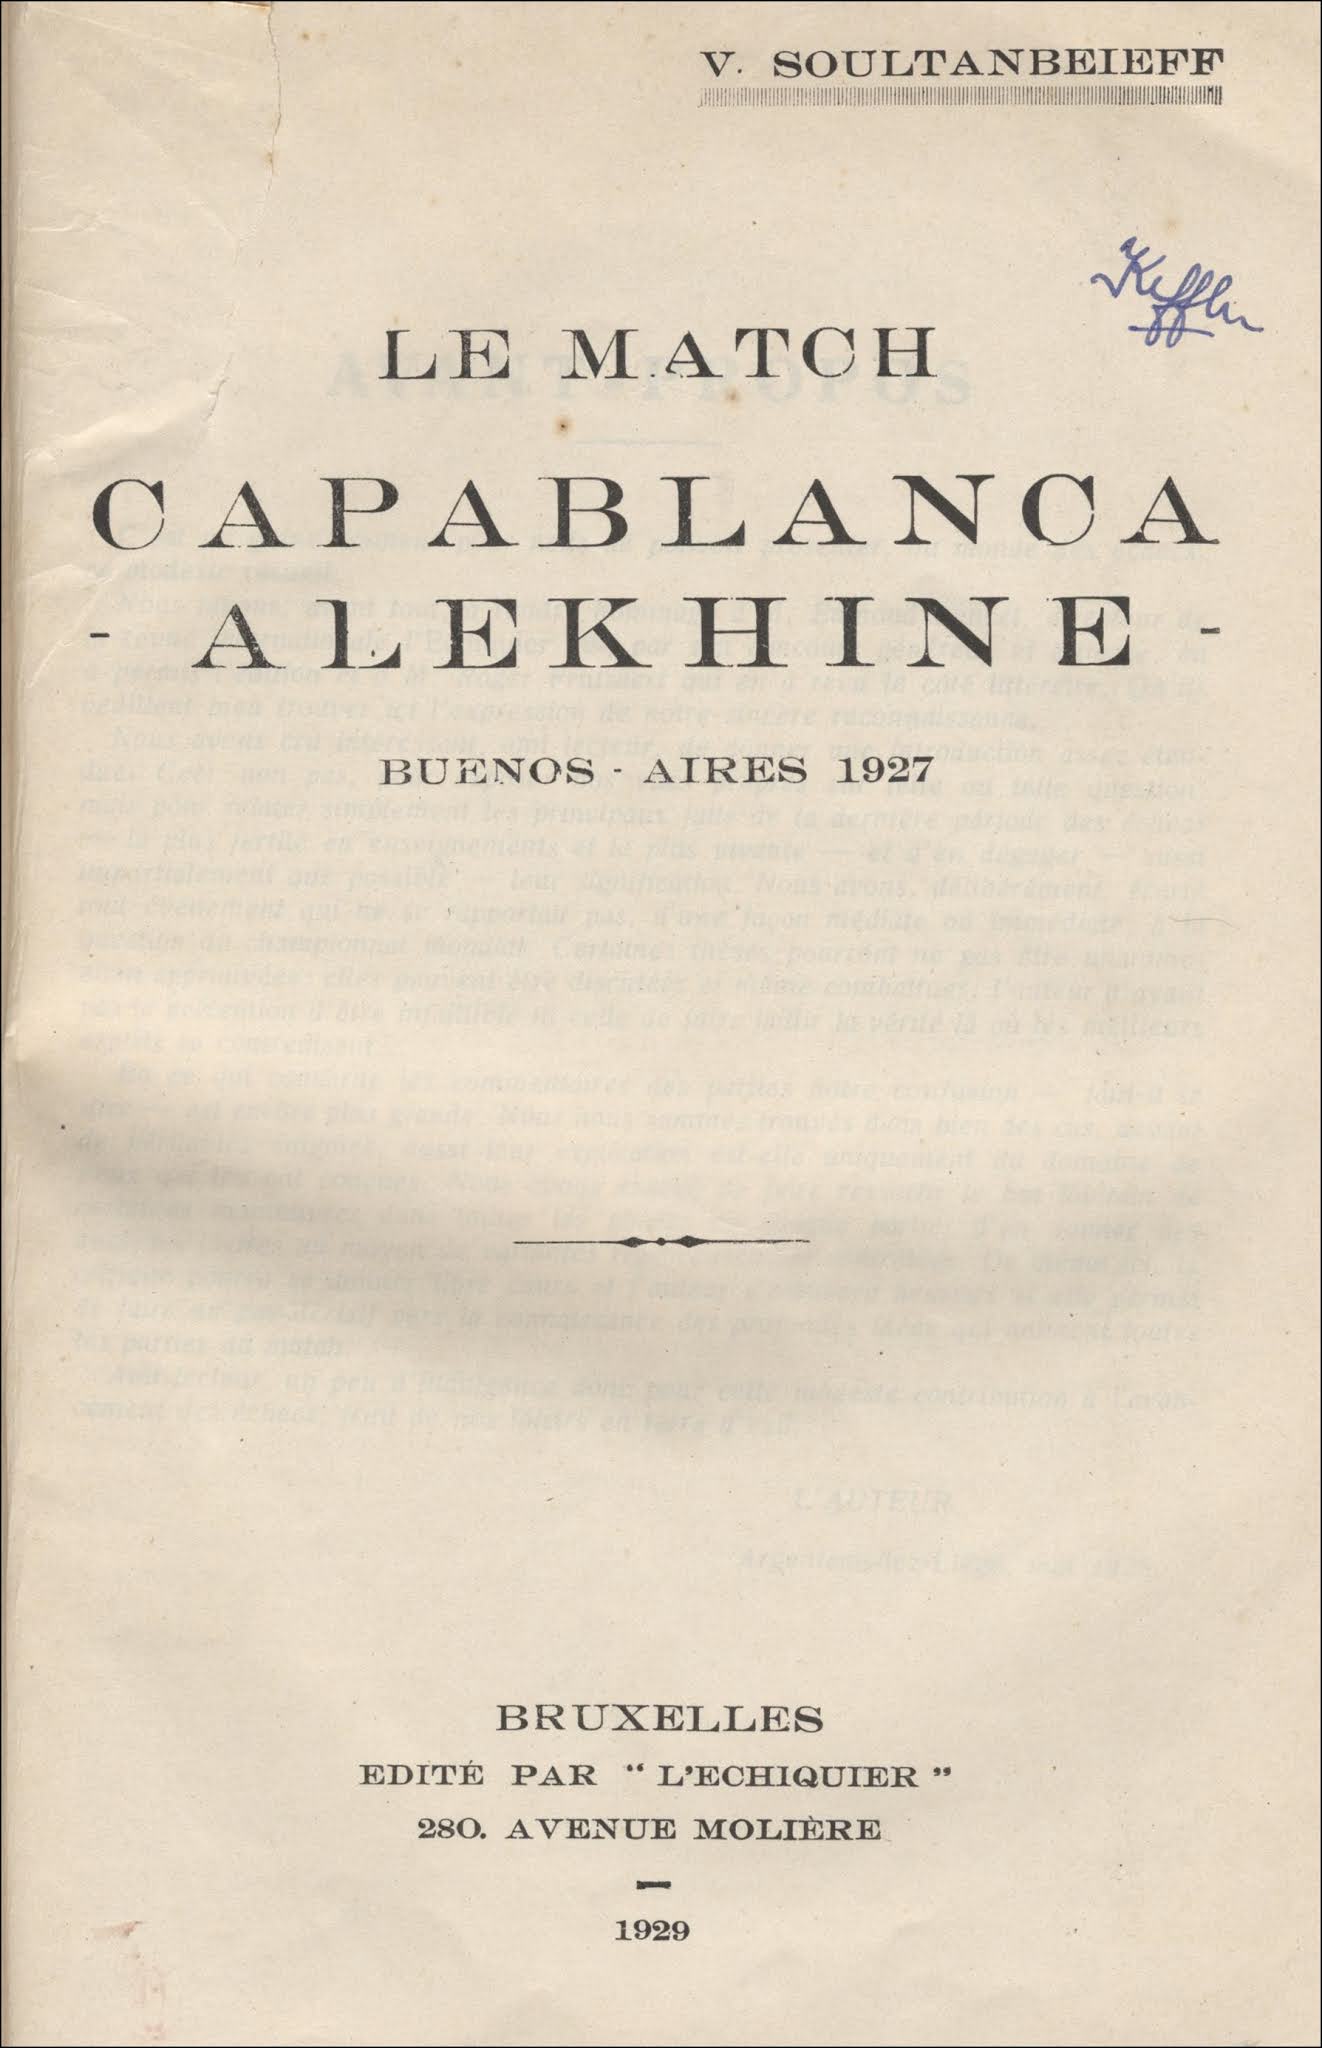 1927 LE MATCH CAPABLANCA-ALEKHINE, by SOULTANBEIEFF - Listing # 12224 -  Preserving the past and the future